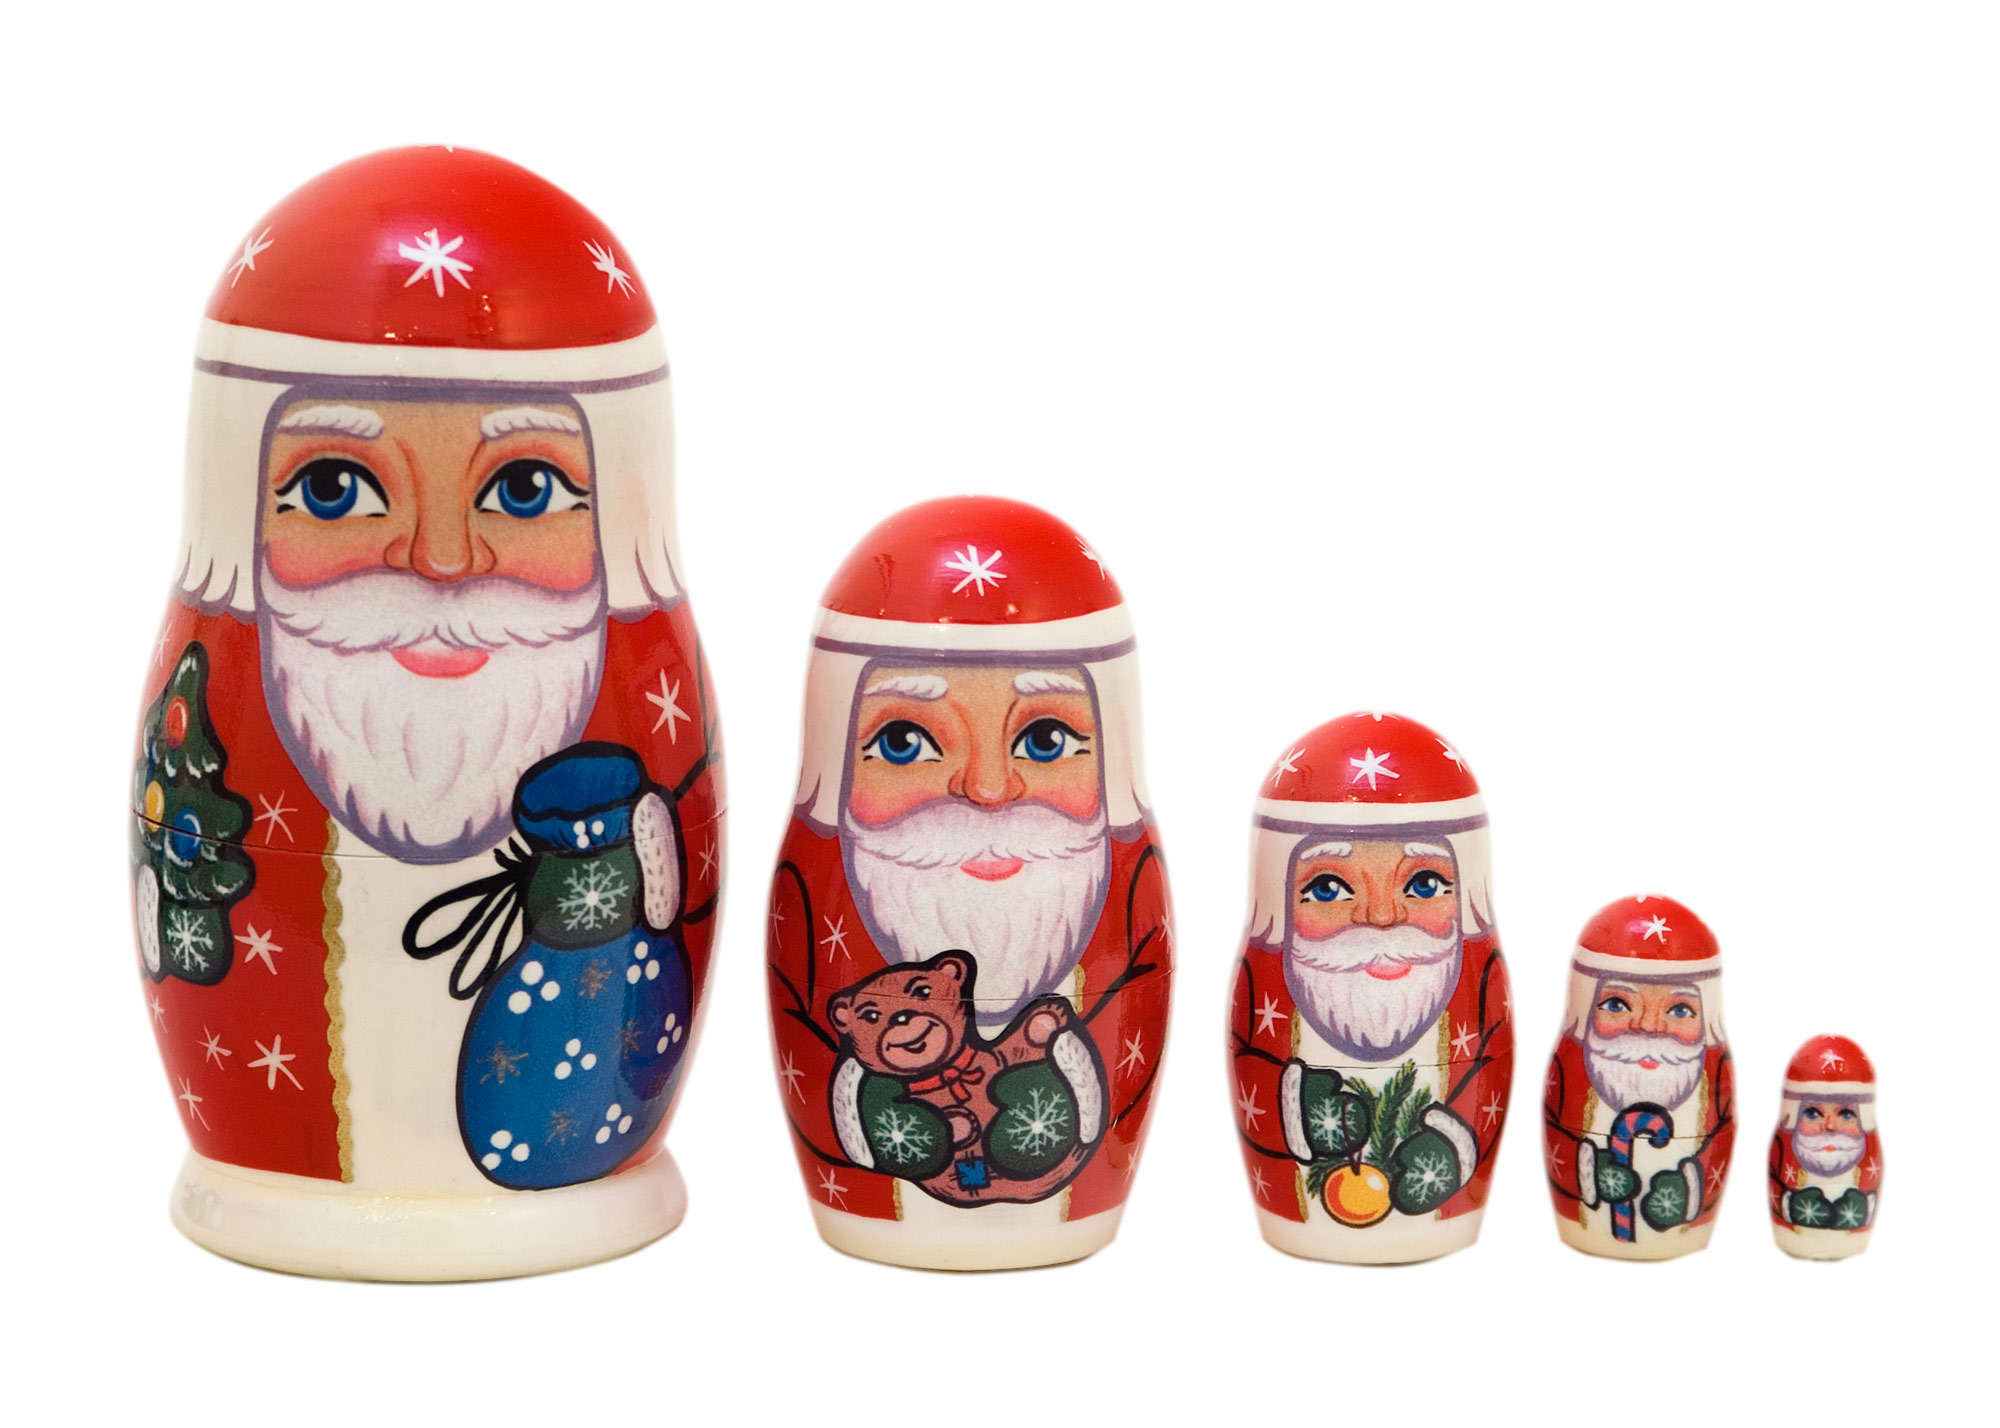 Buy Father Frost Nesting Doll 5pc./4" at GoldenCockerel.com